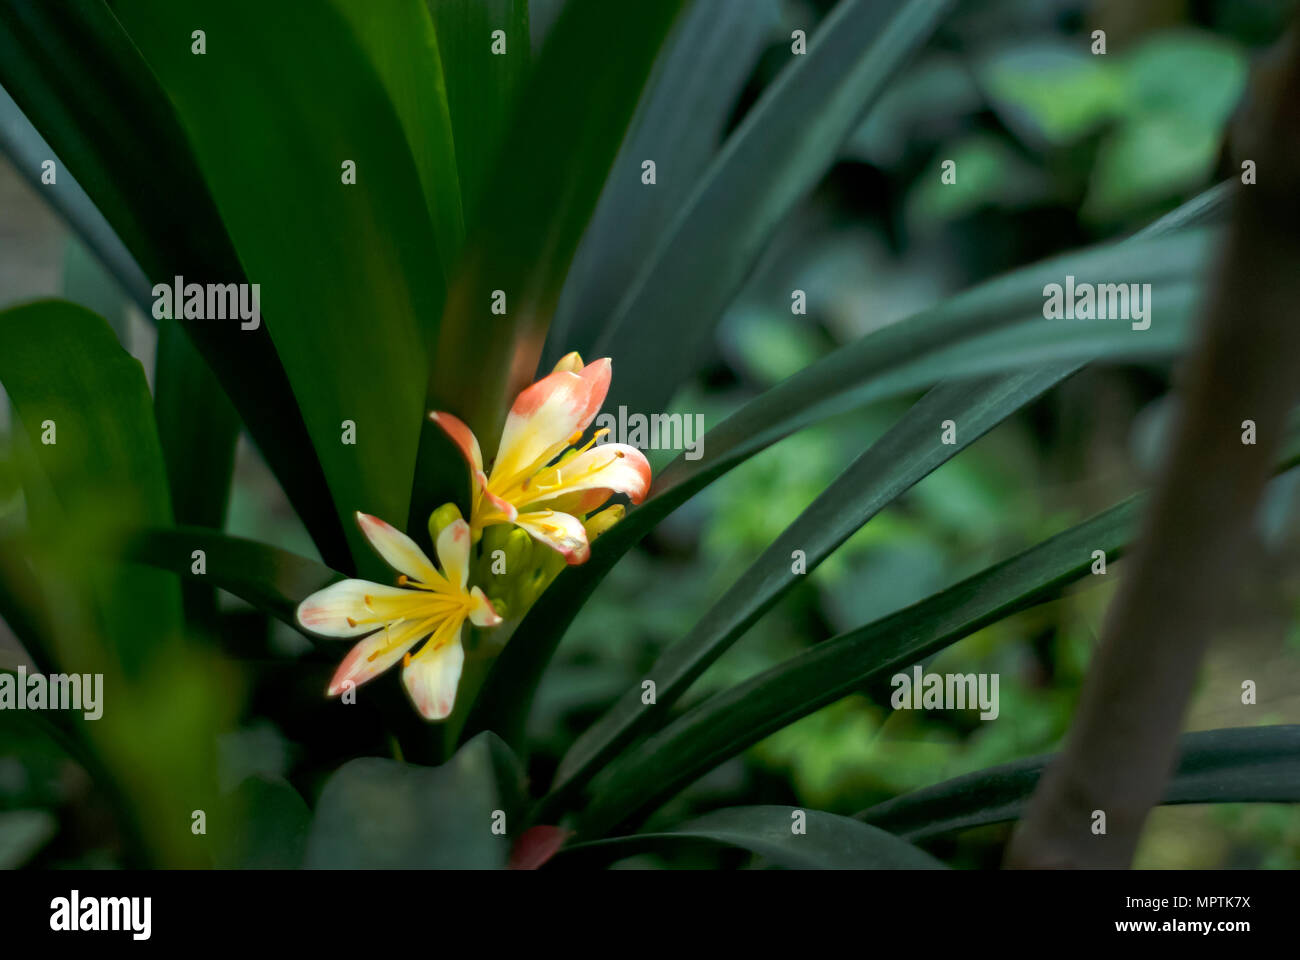 beautiful orange flowers of a clivia closeup on a blurred green floral background Stock Photo